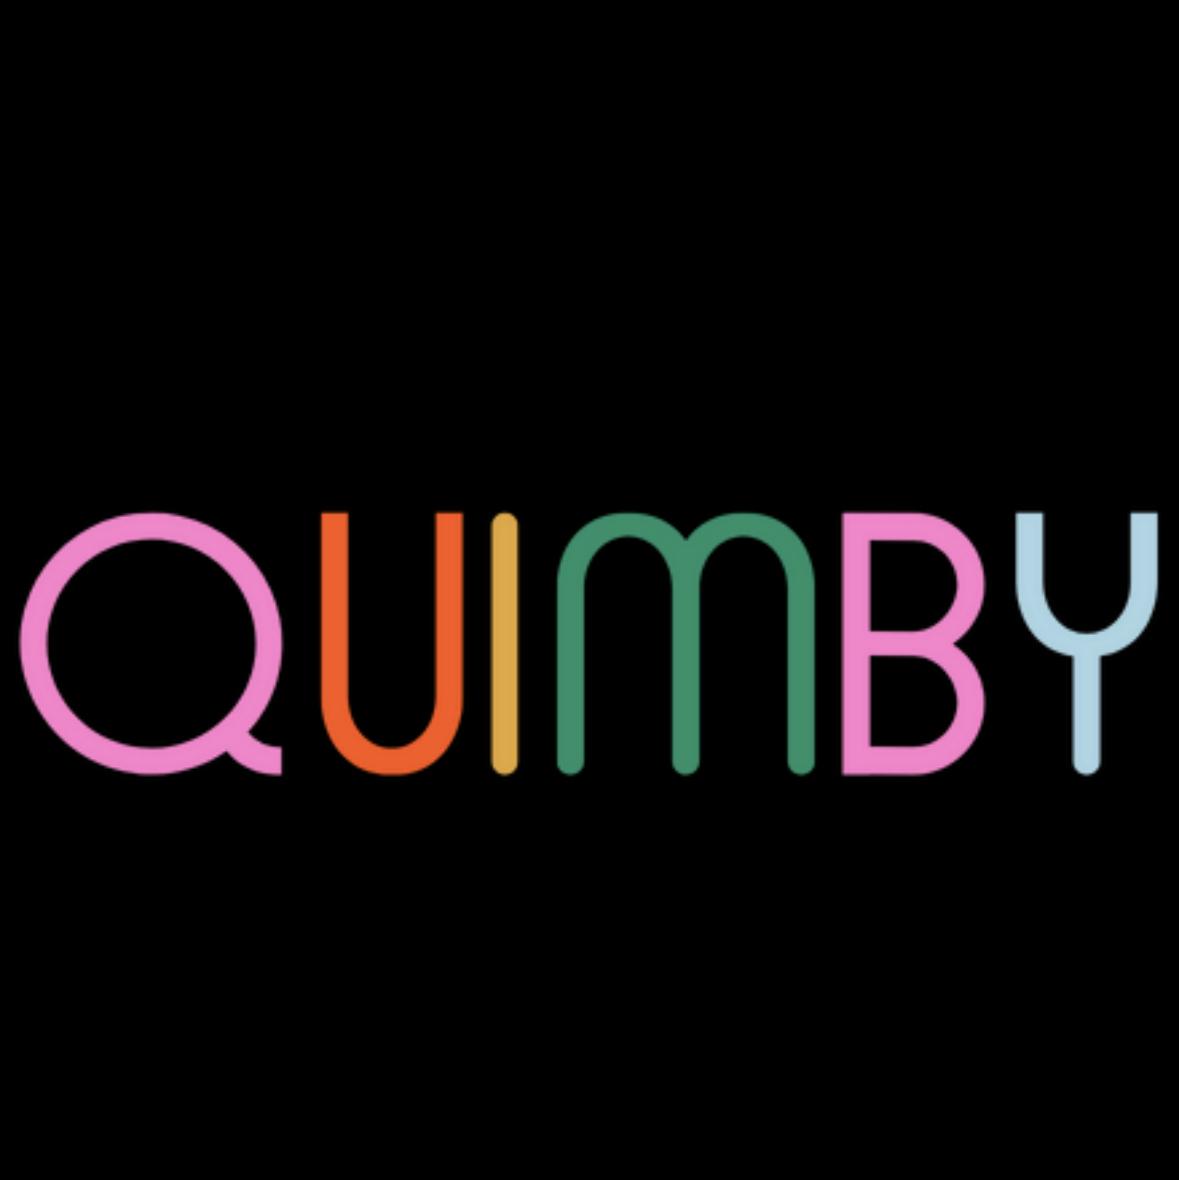 Quimby's images